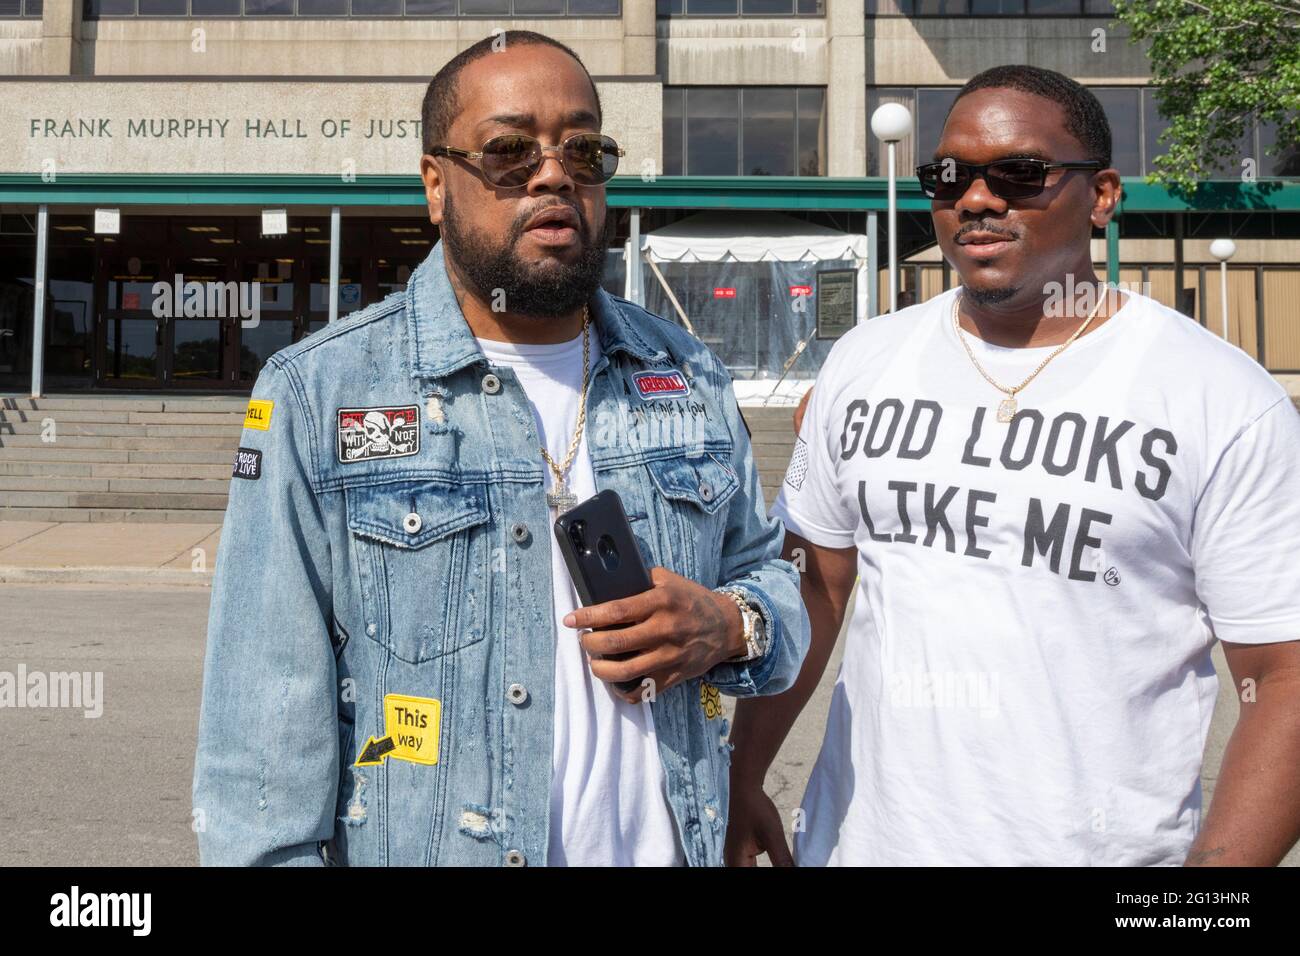 Detroit, Michigan, USA. 4th June, 2021. Family and friends of prisoners they say were wrongfully convicted rally outside the criminal courts building, the Frank Murphy Hall of Justice. George Clark (left) and Kevin Harrington spent nearly 18 years in prison before their murder convictions were overturned. Credit: Jim West/Alamy Live News Stock Photo